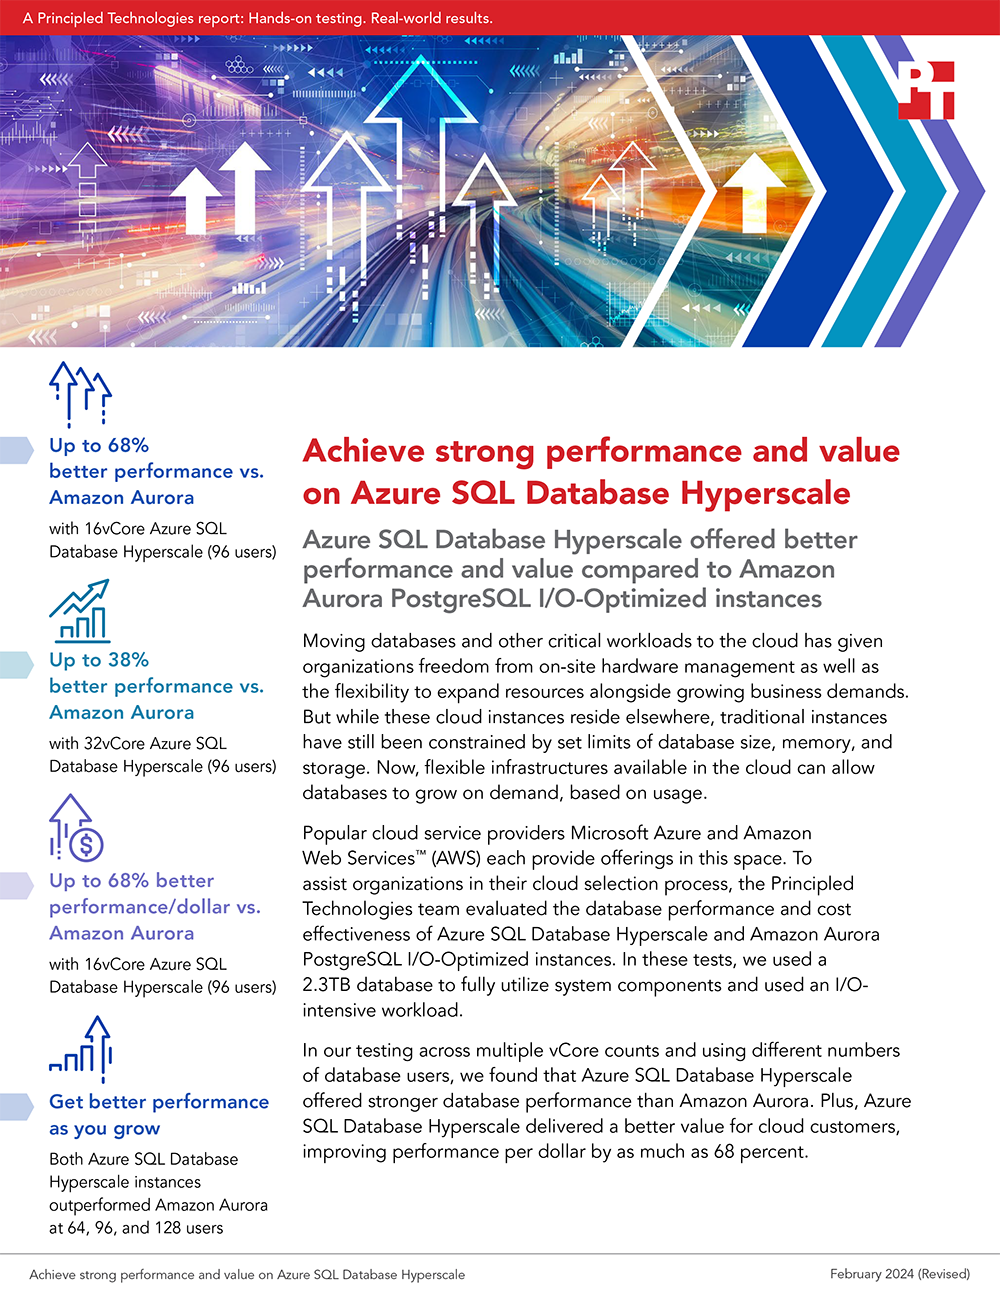 Achieve strong performance and value on Azure SQL Database Hyperscale